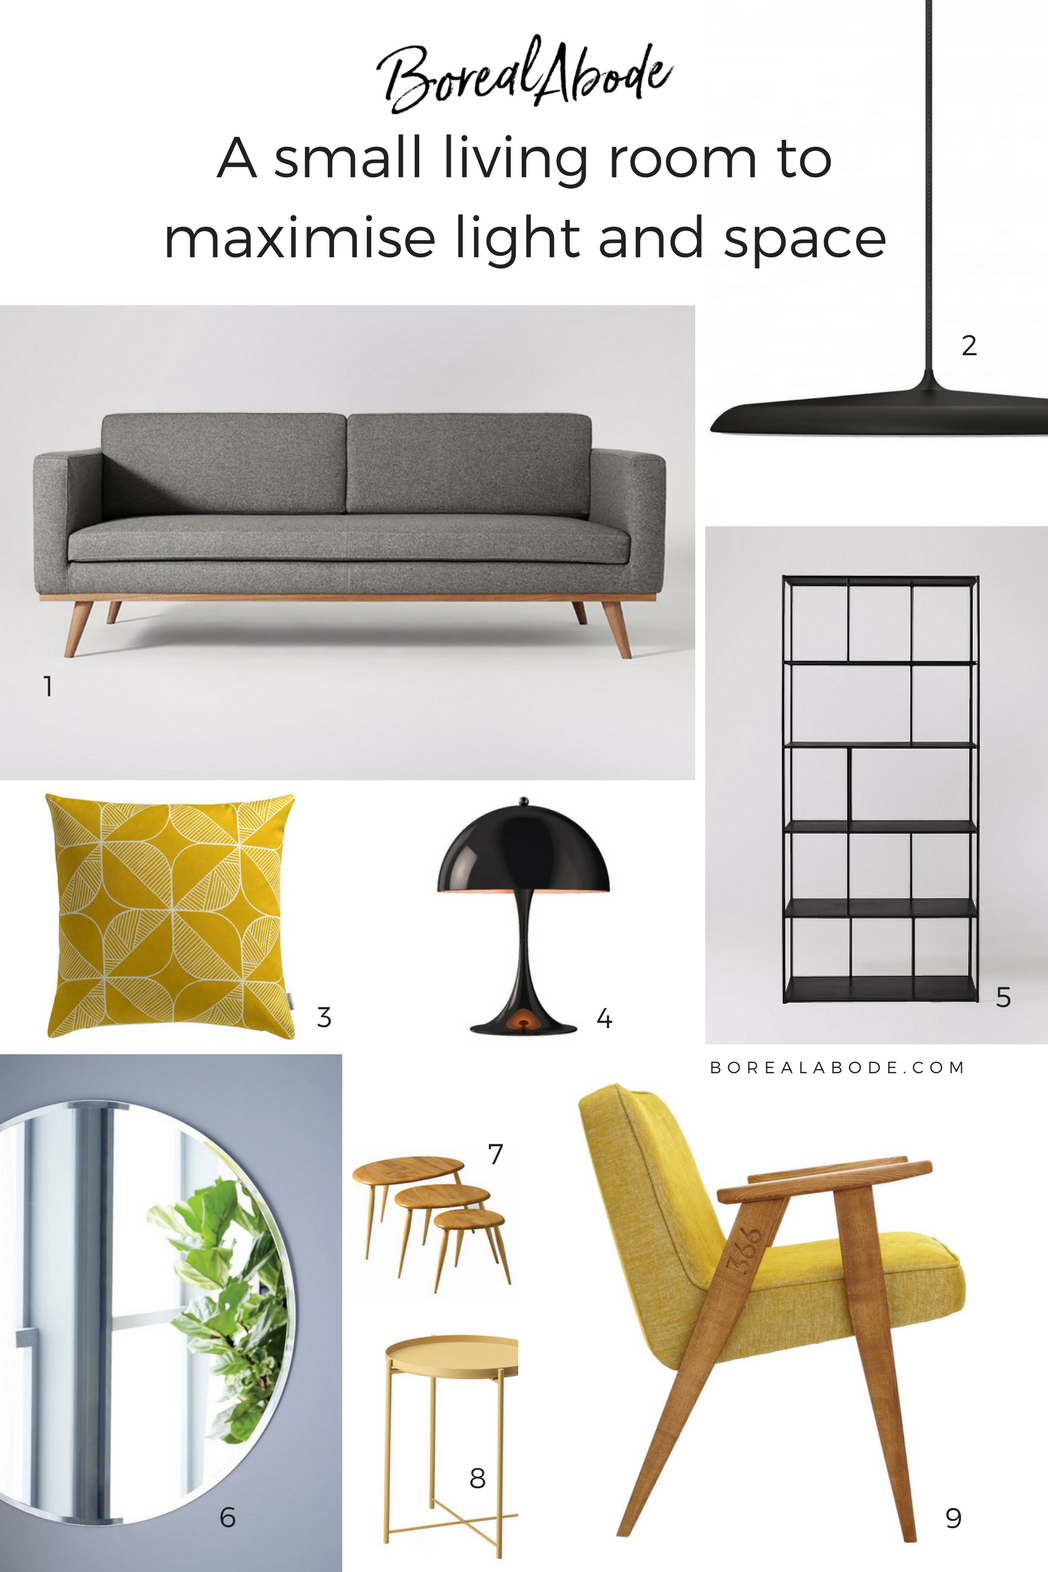 Mood Board inspiration - A small living room to maximise light and space - contemporary style with a mid-century modern twist